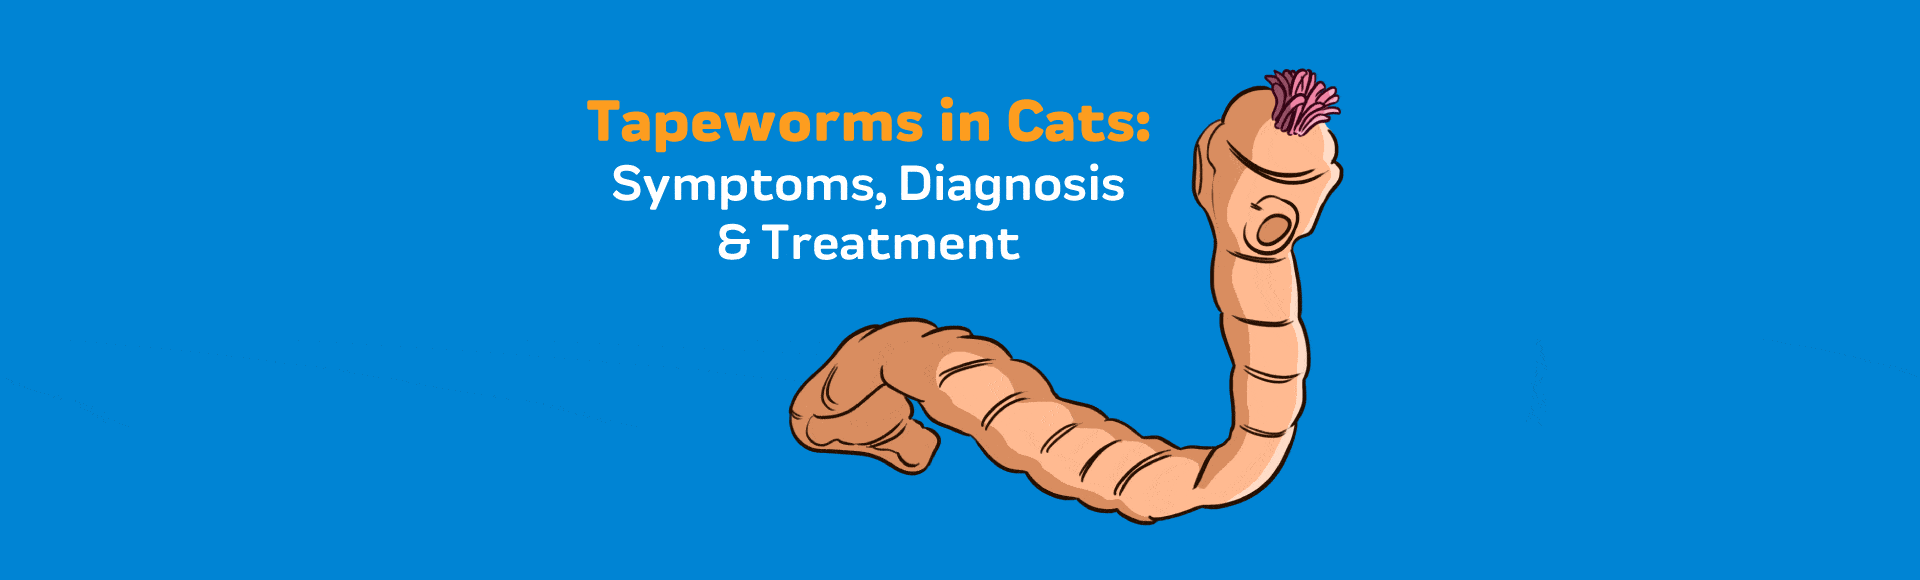 pictures of tapeworms in cats